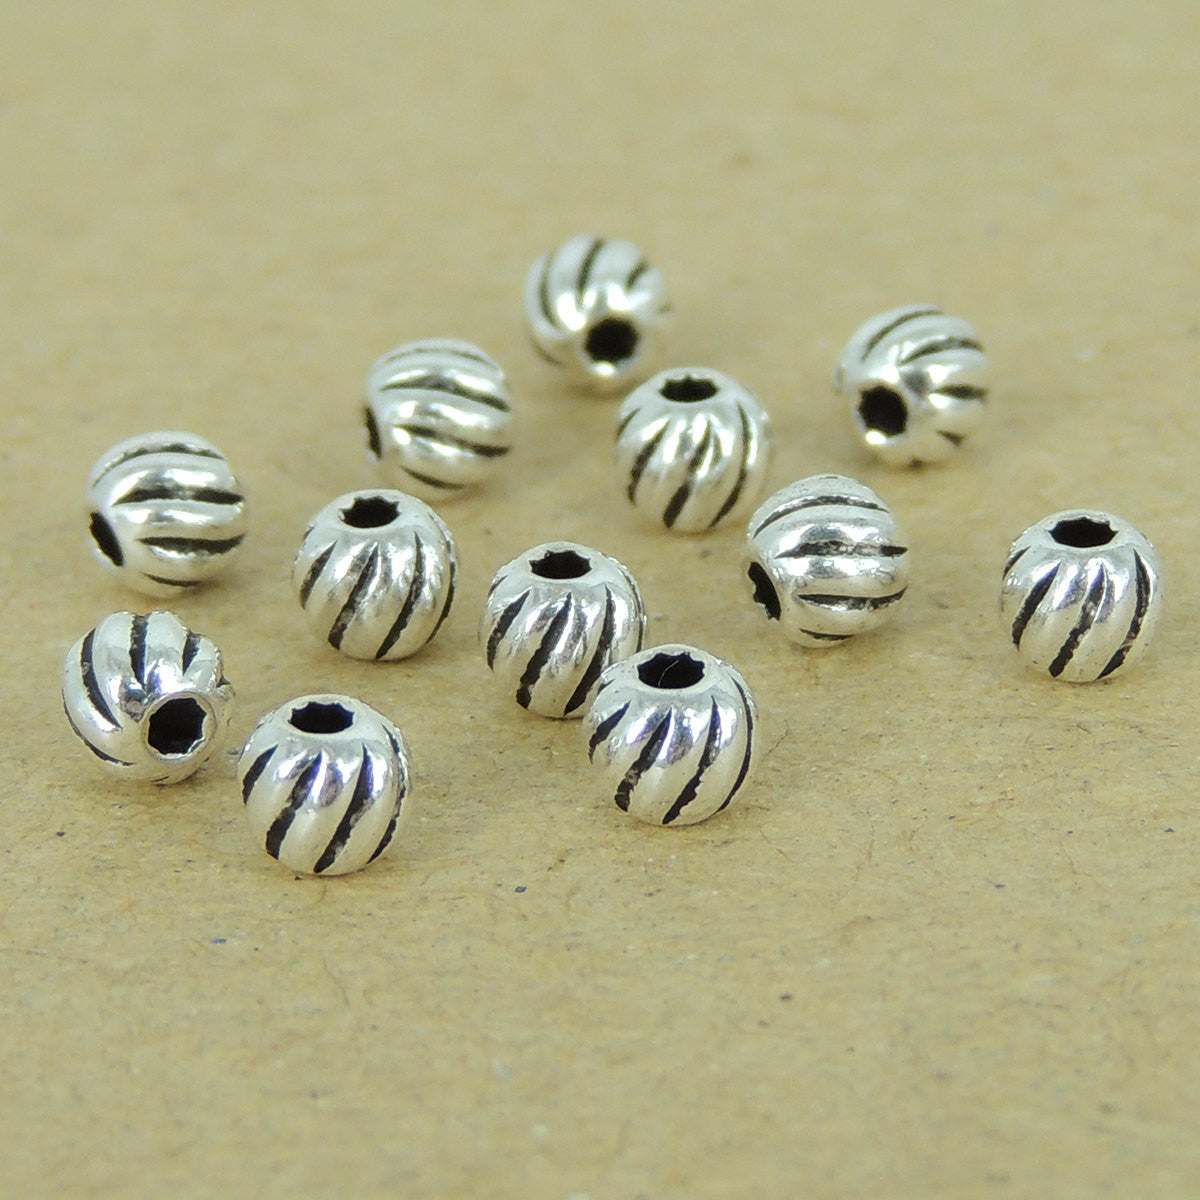 20 PCS Patterned Spacer Beads - S925 Sterling Silver WSP396X20